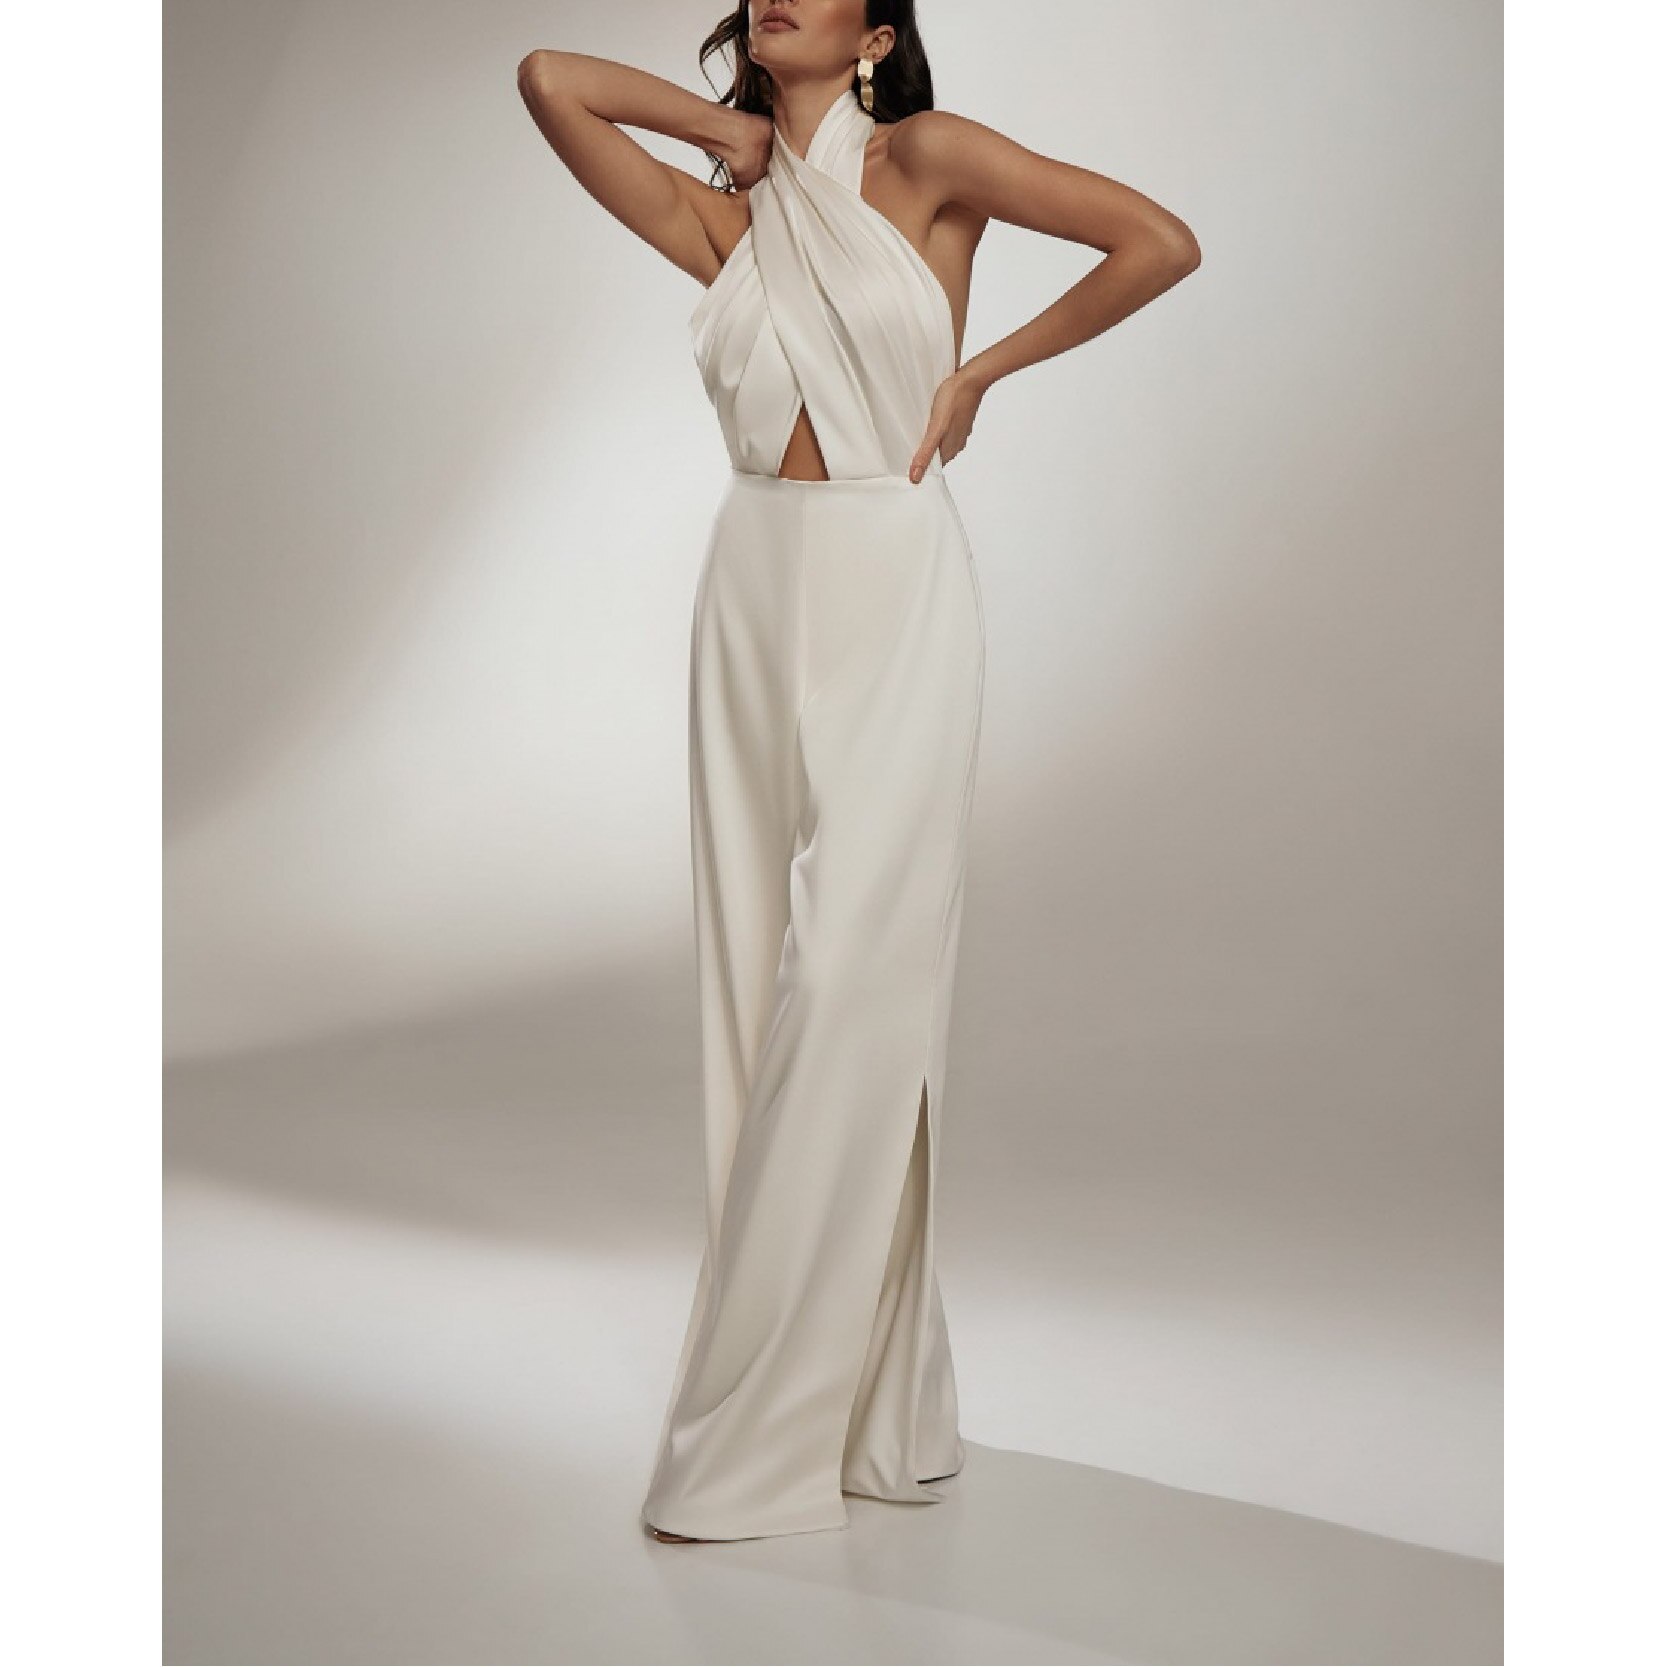 Ladies-Jumpsuit-Sexy-Slim-Solid-Color-Sleeveless-Cross-Halter-Hollow-Backless-Wide-Leg-Pants-Trousers-Daily-1